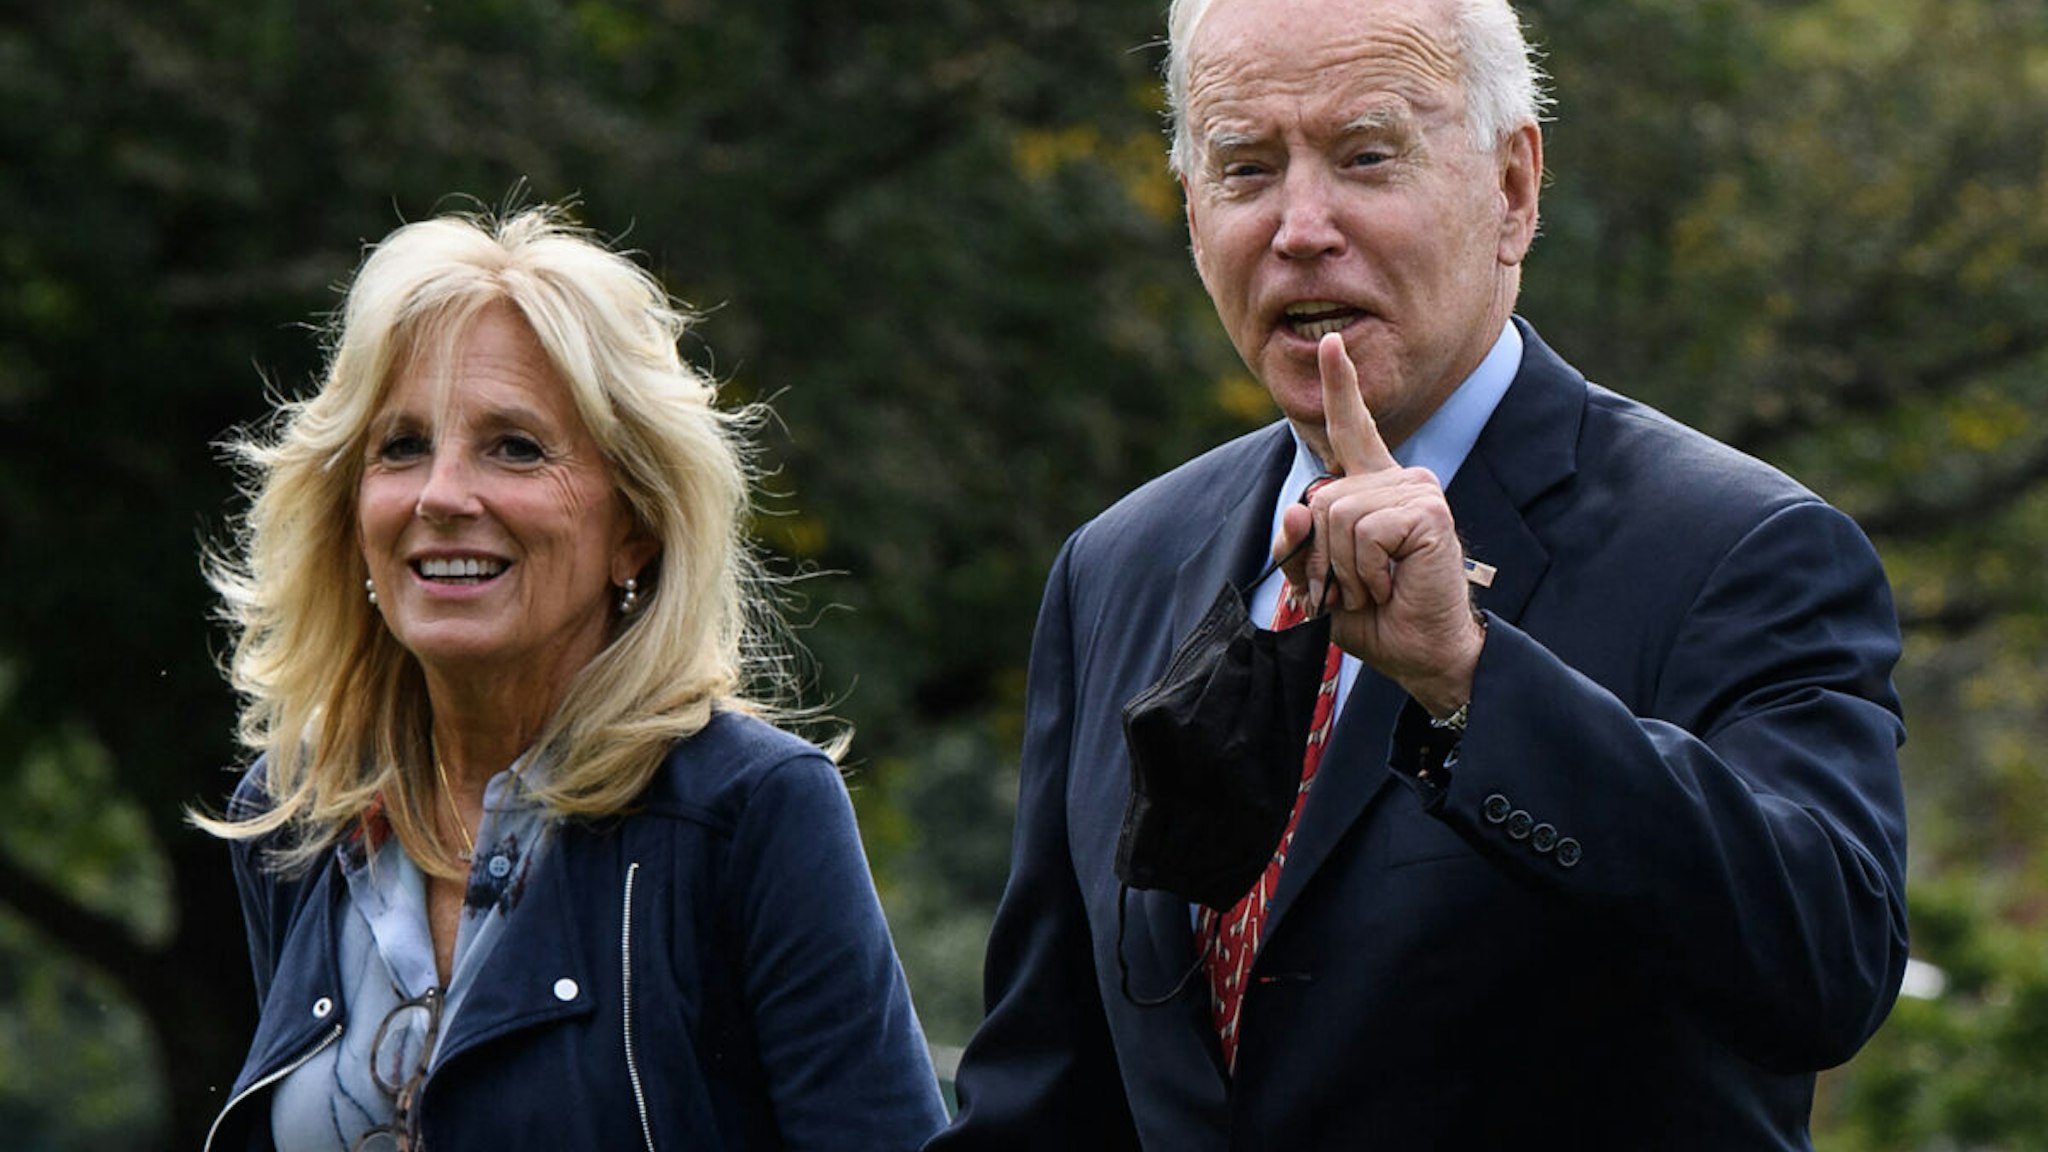 US President Joe Biden and First Lady Jill Biden arrive at the White House in Washington, DC, on October 4, 2021 after spending the weekend in Wilmington, Delaware.